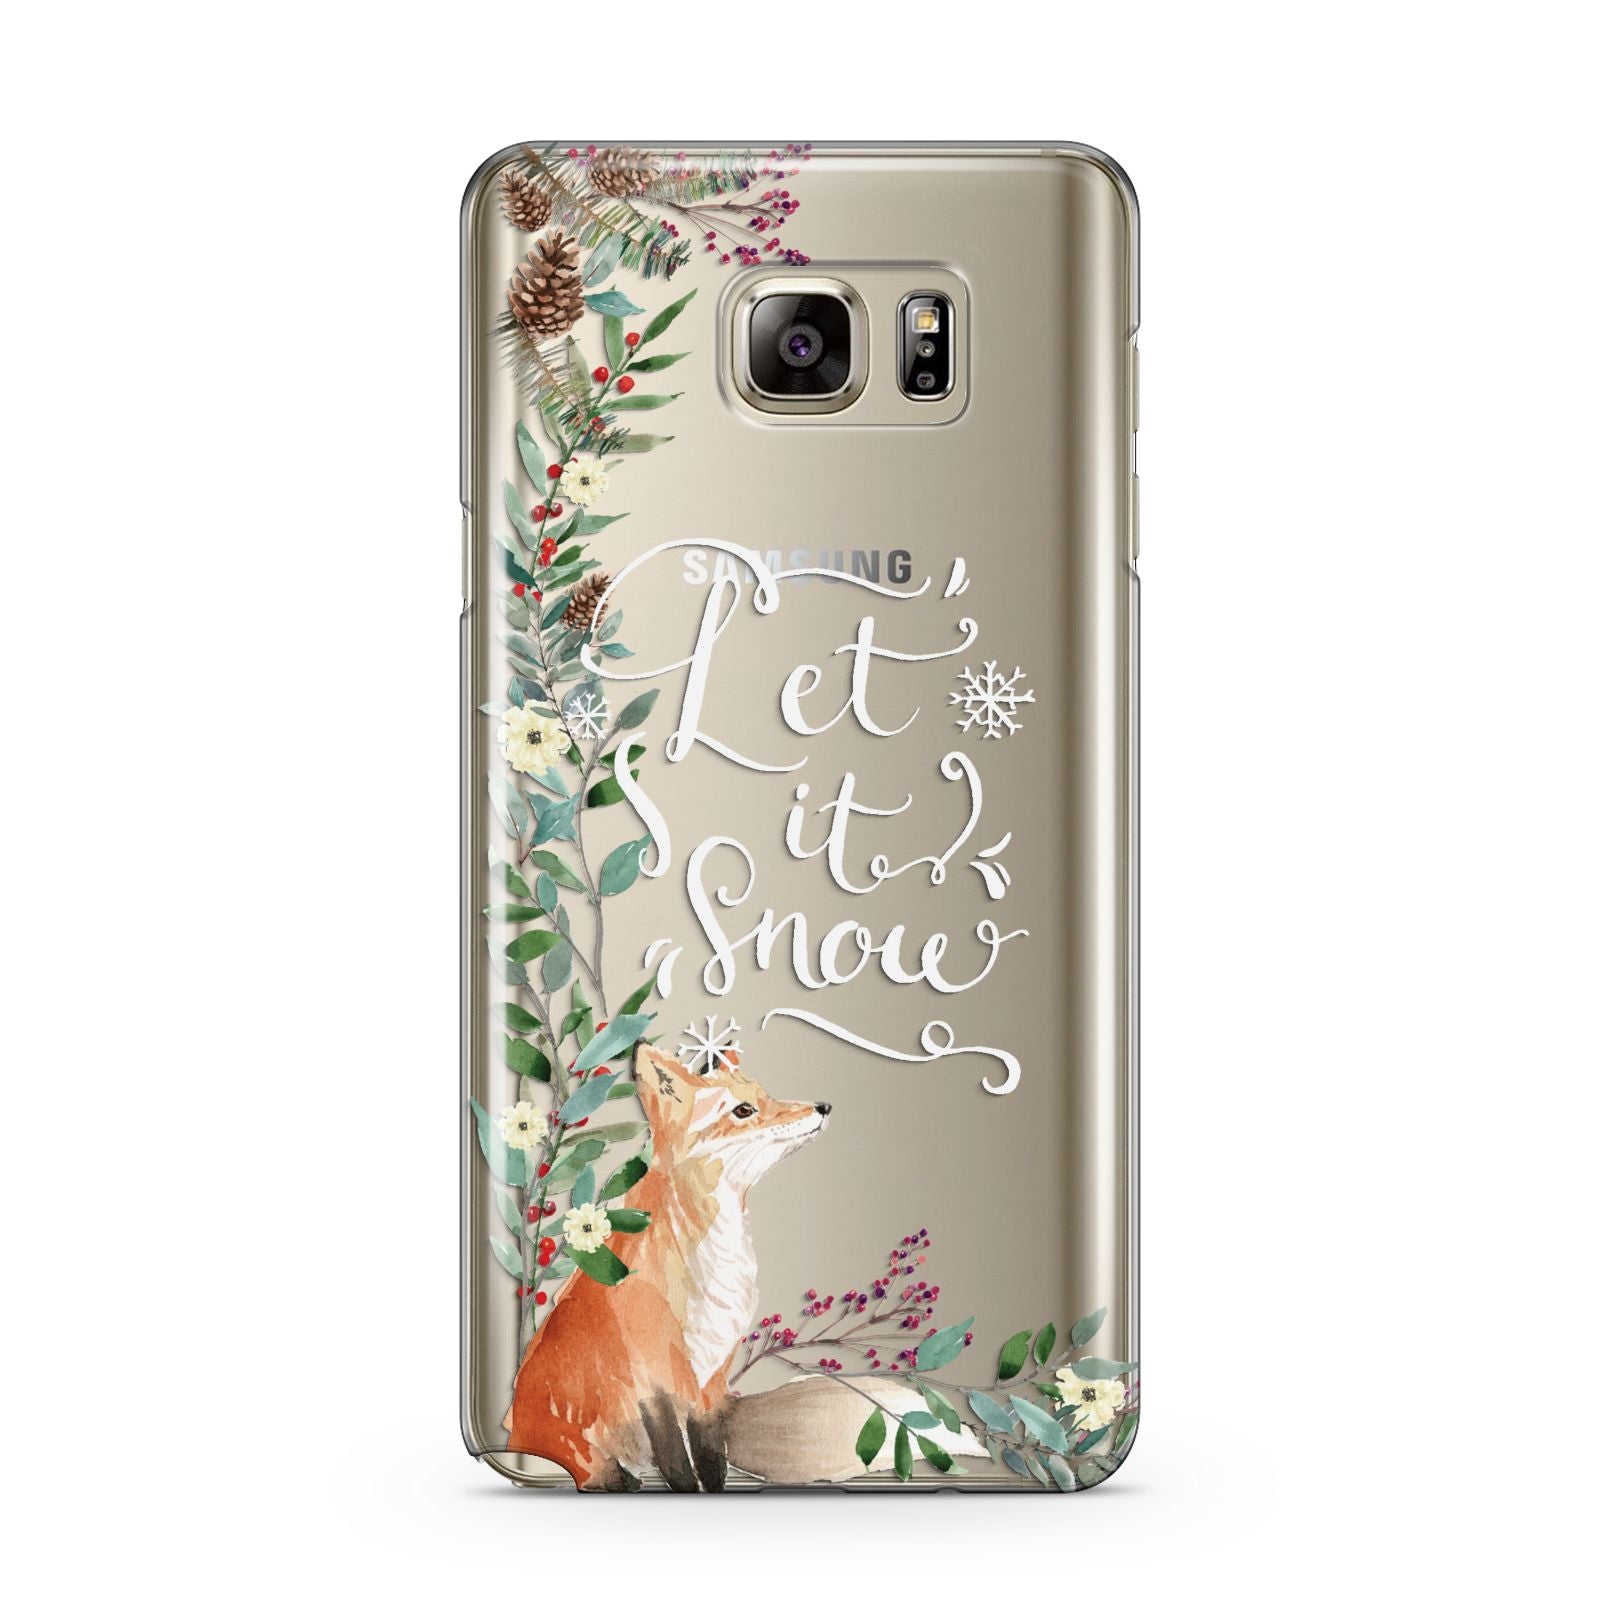 Let It Snow Christmas Samsung Galaxy Note 5 Case